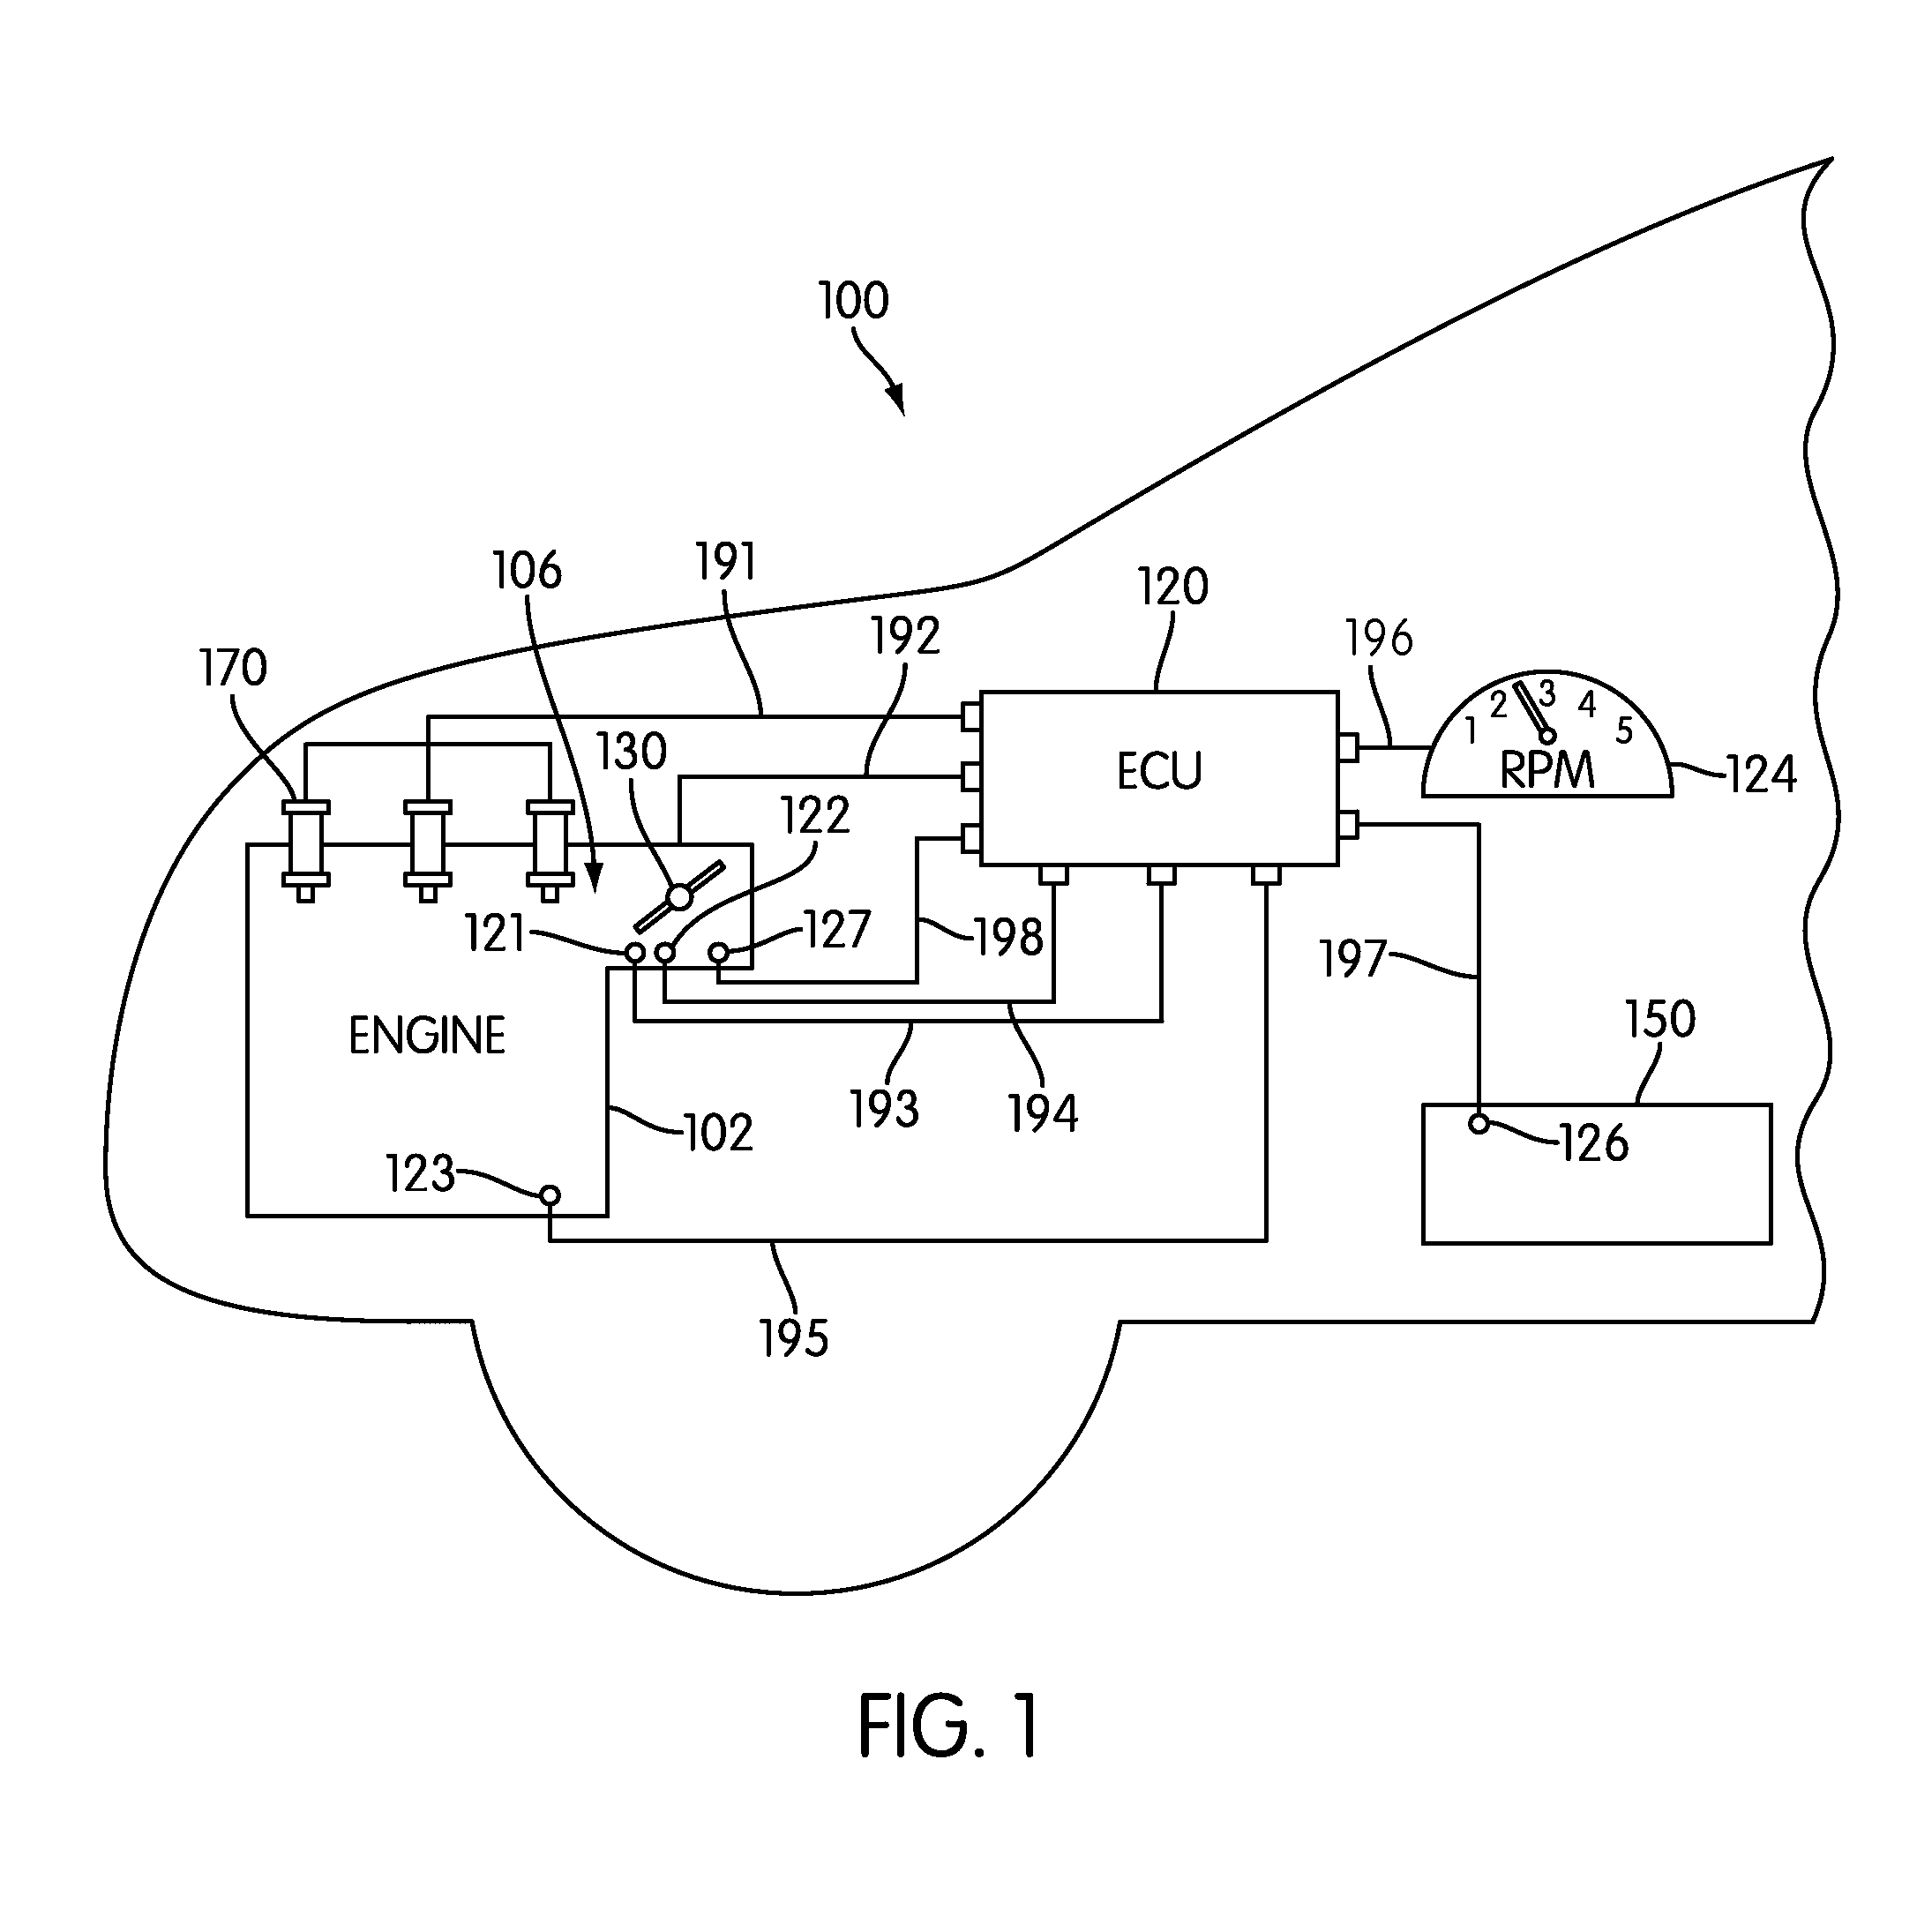 Method of determining ambient pressure for fuel injection